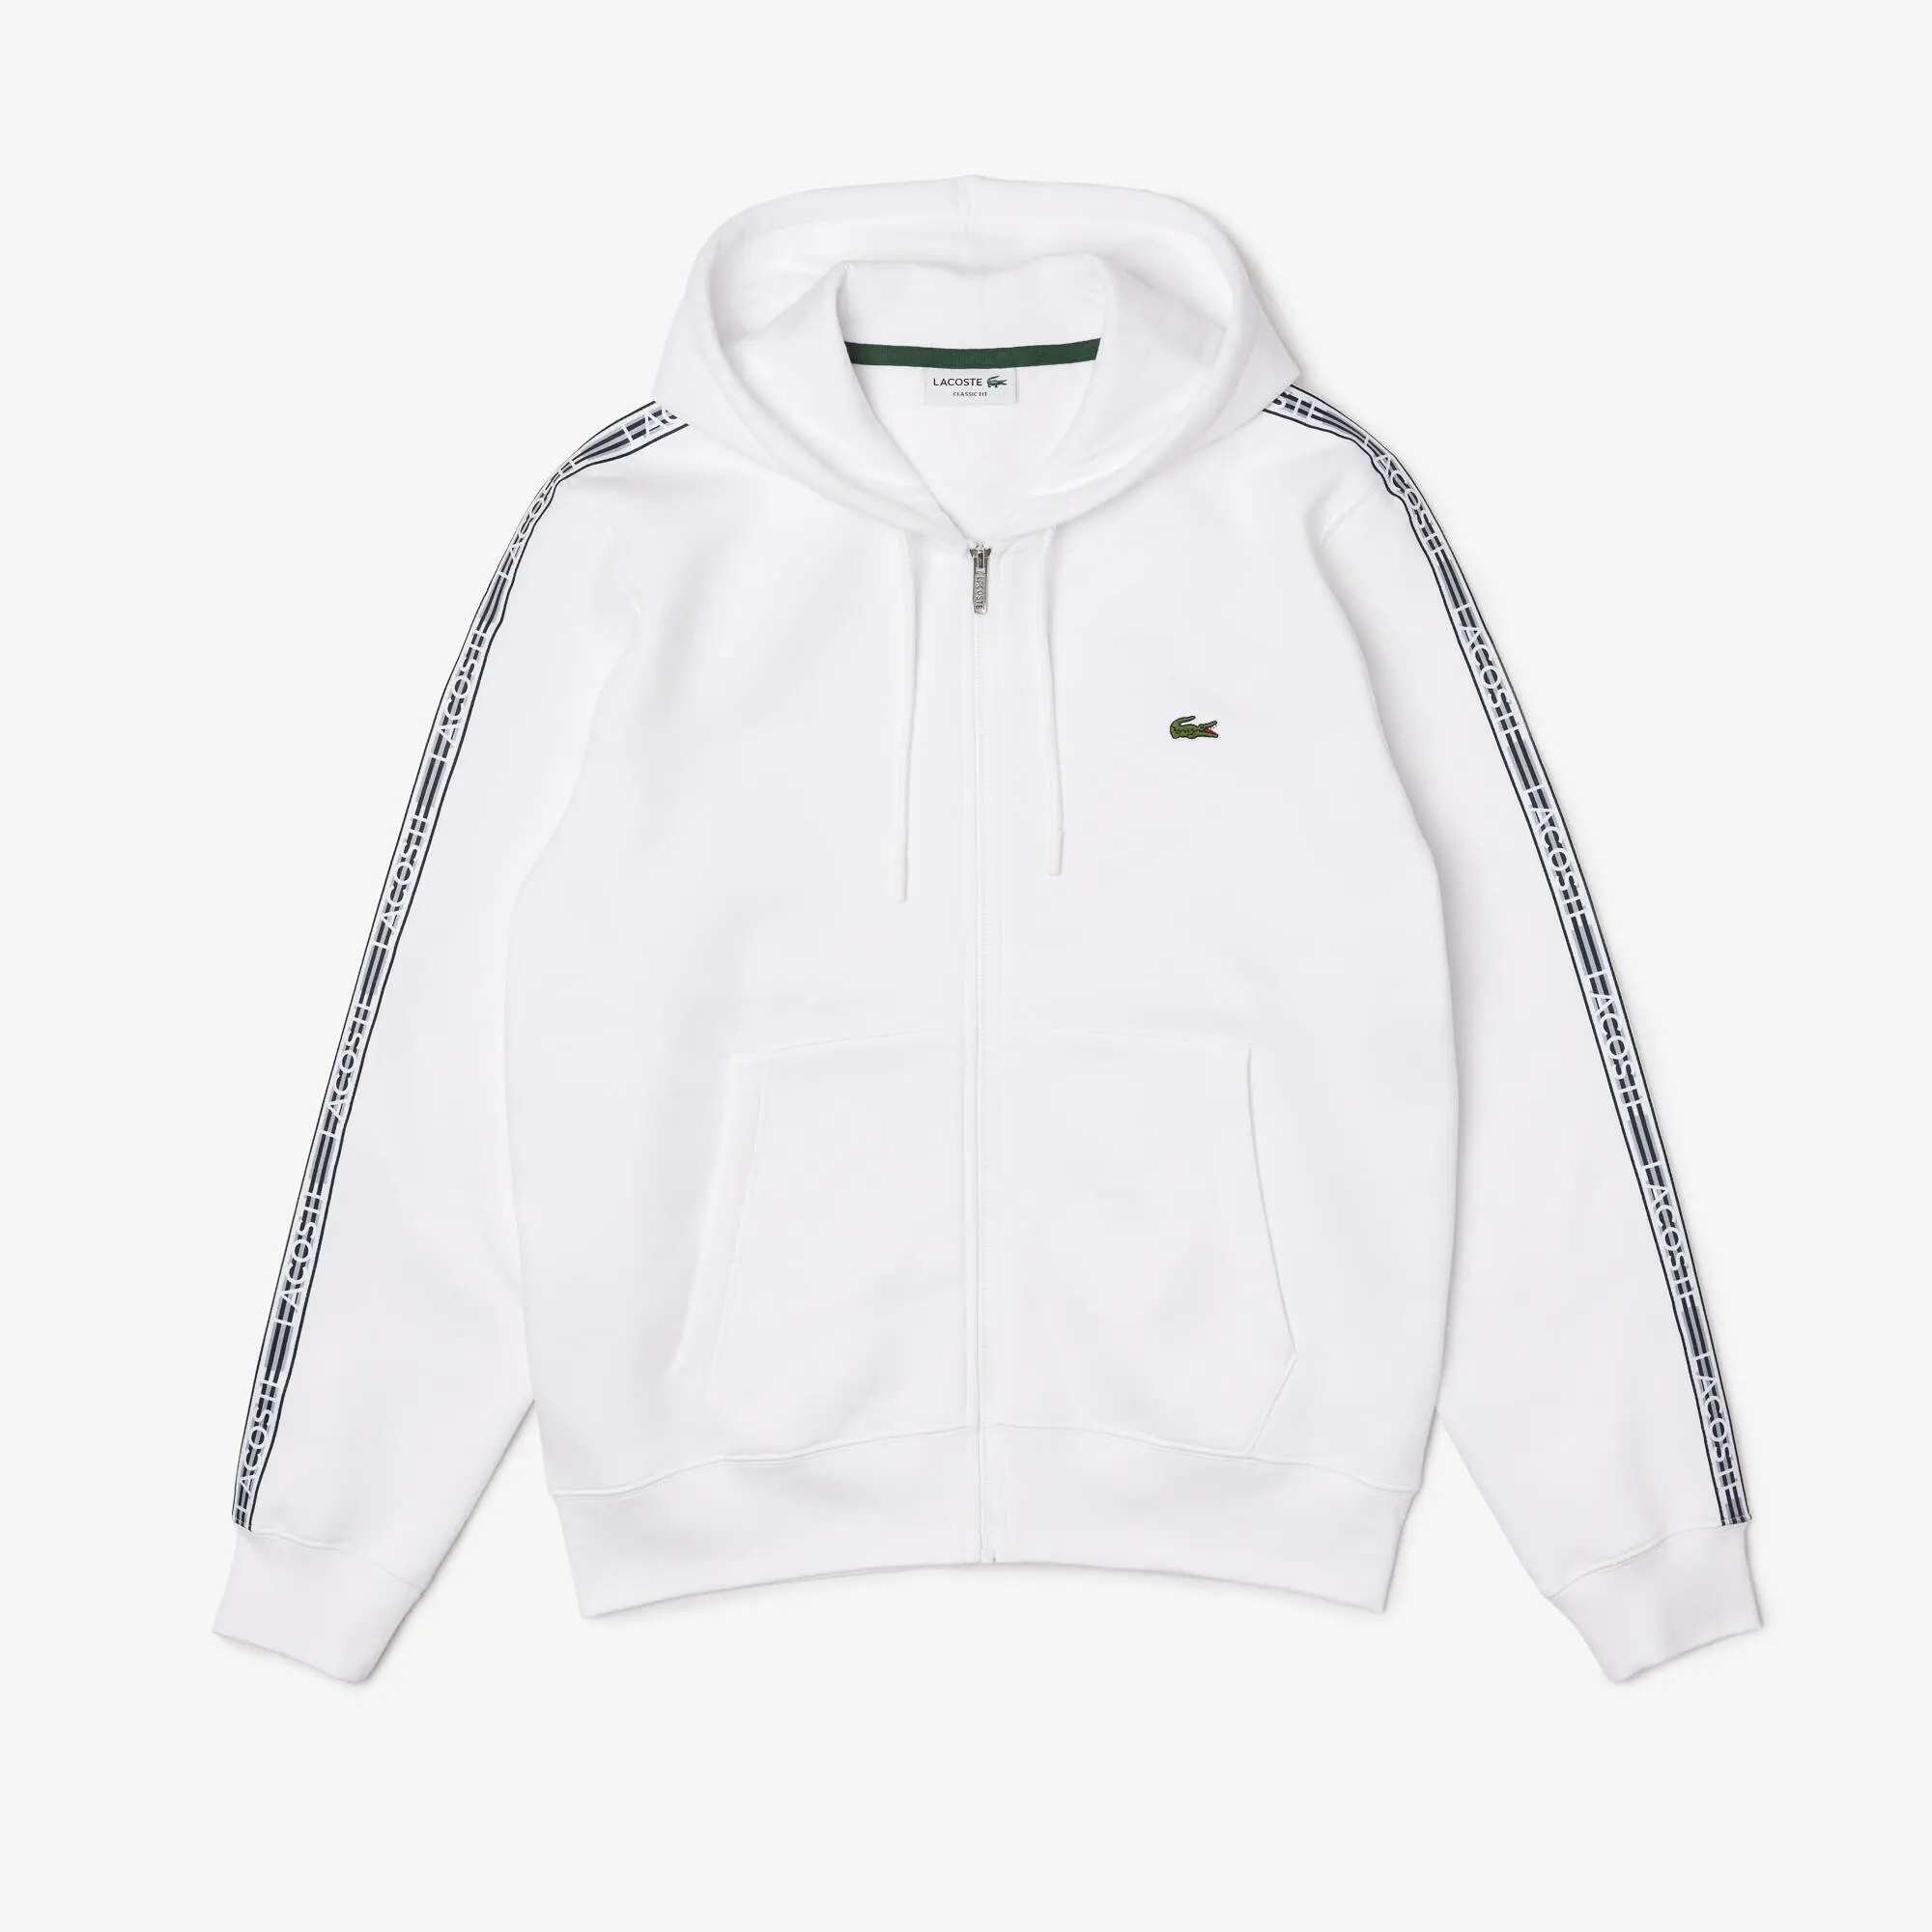 Lacoste Men’s Classic Fit Zipped Jogger Hoodie with Brand Stripes. 2